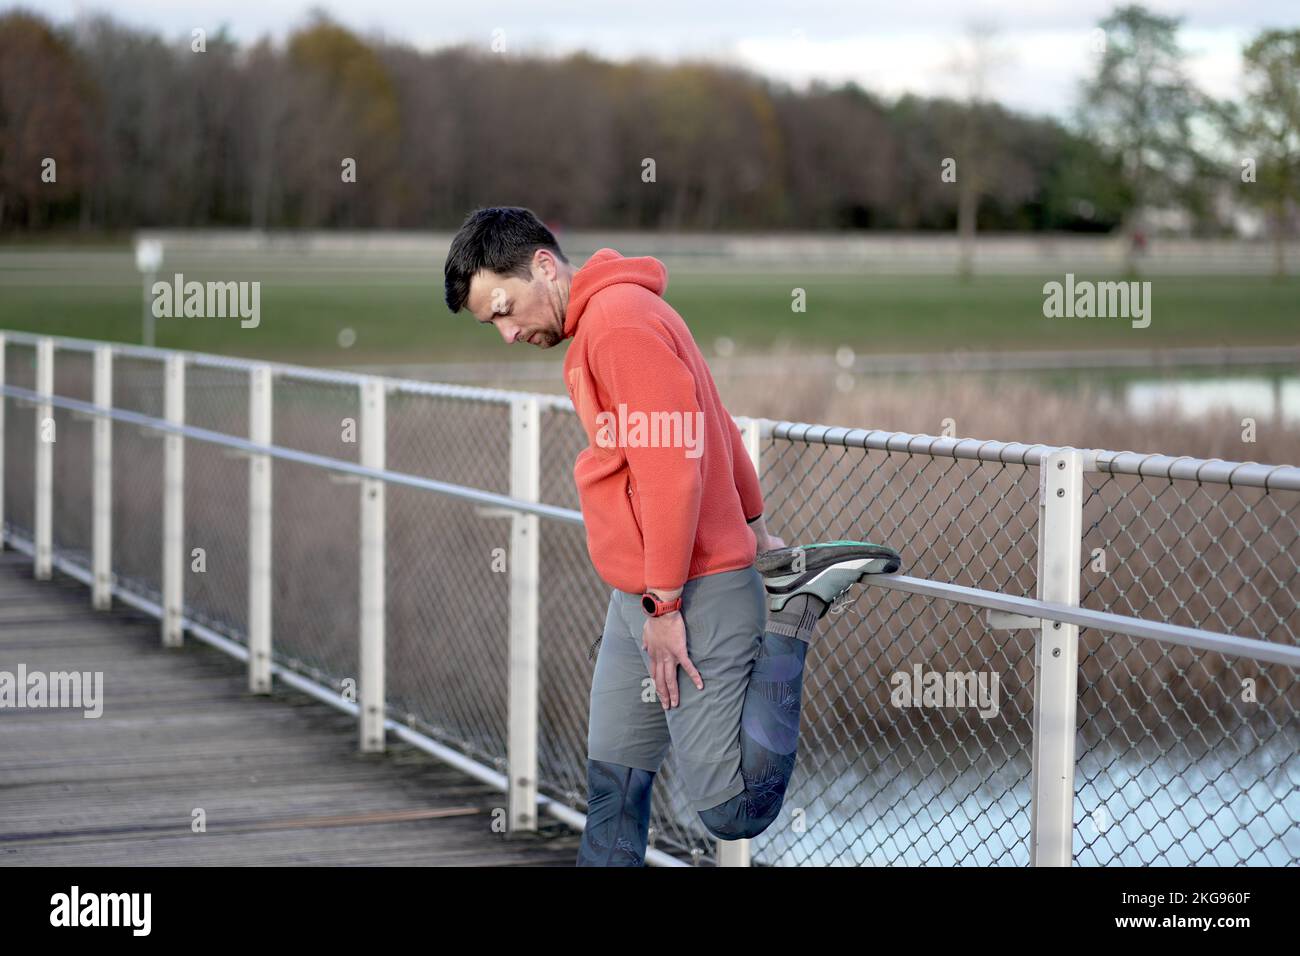 Athlete warming up before an outdoor cardio workout. A jogger warms up his muscles for a jog in nature on a wooden bridge in the cold fall weather Stock Photo